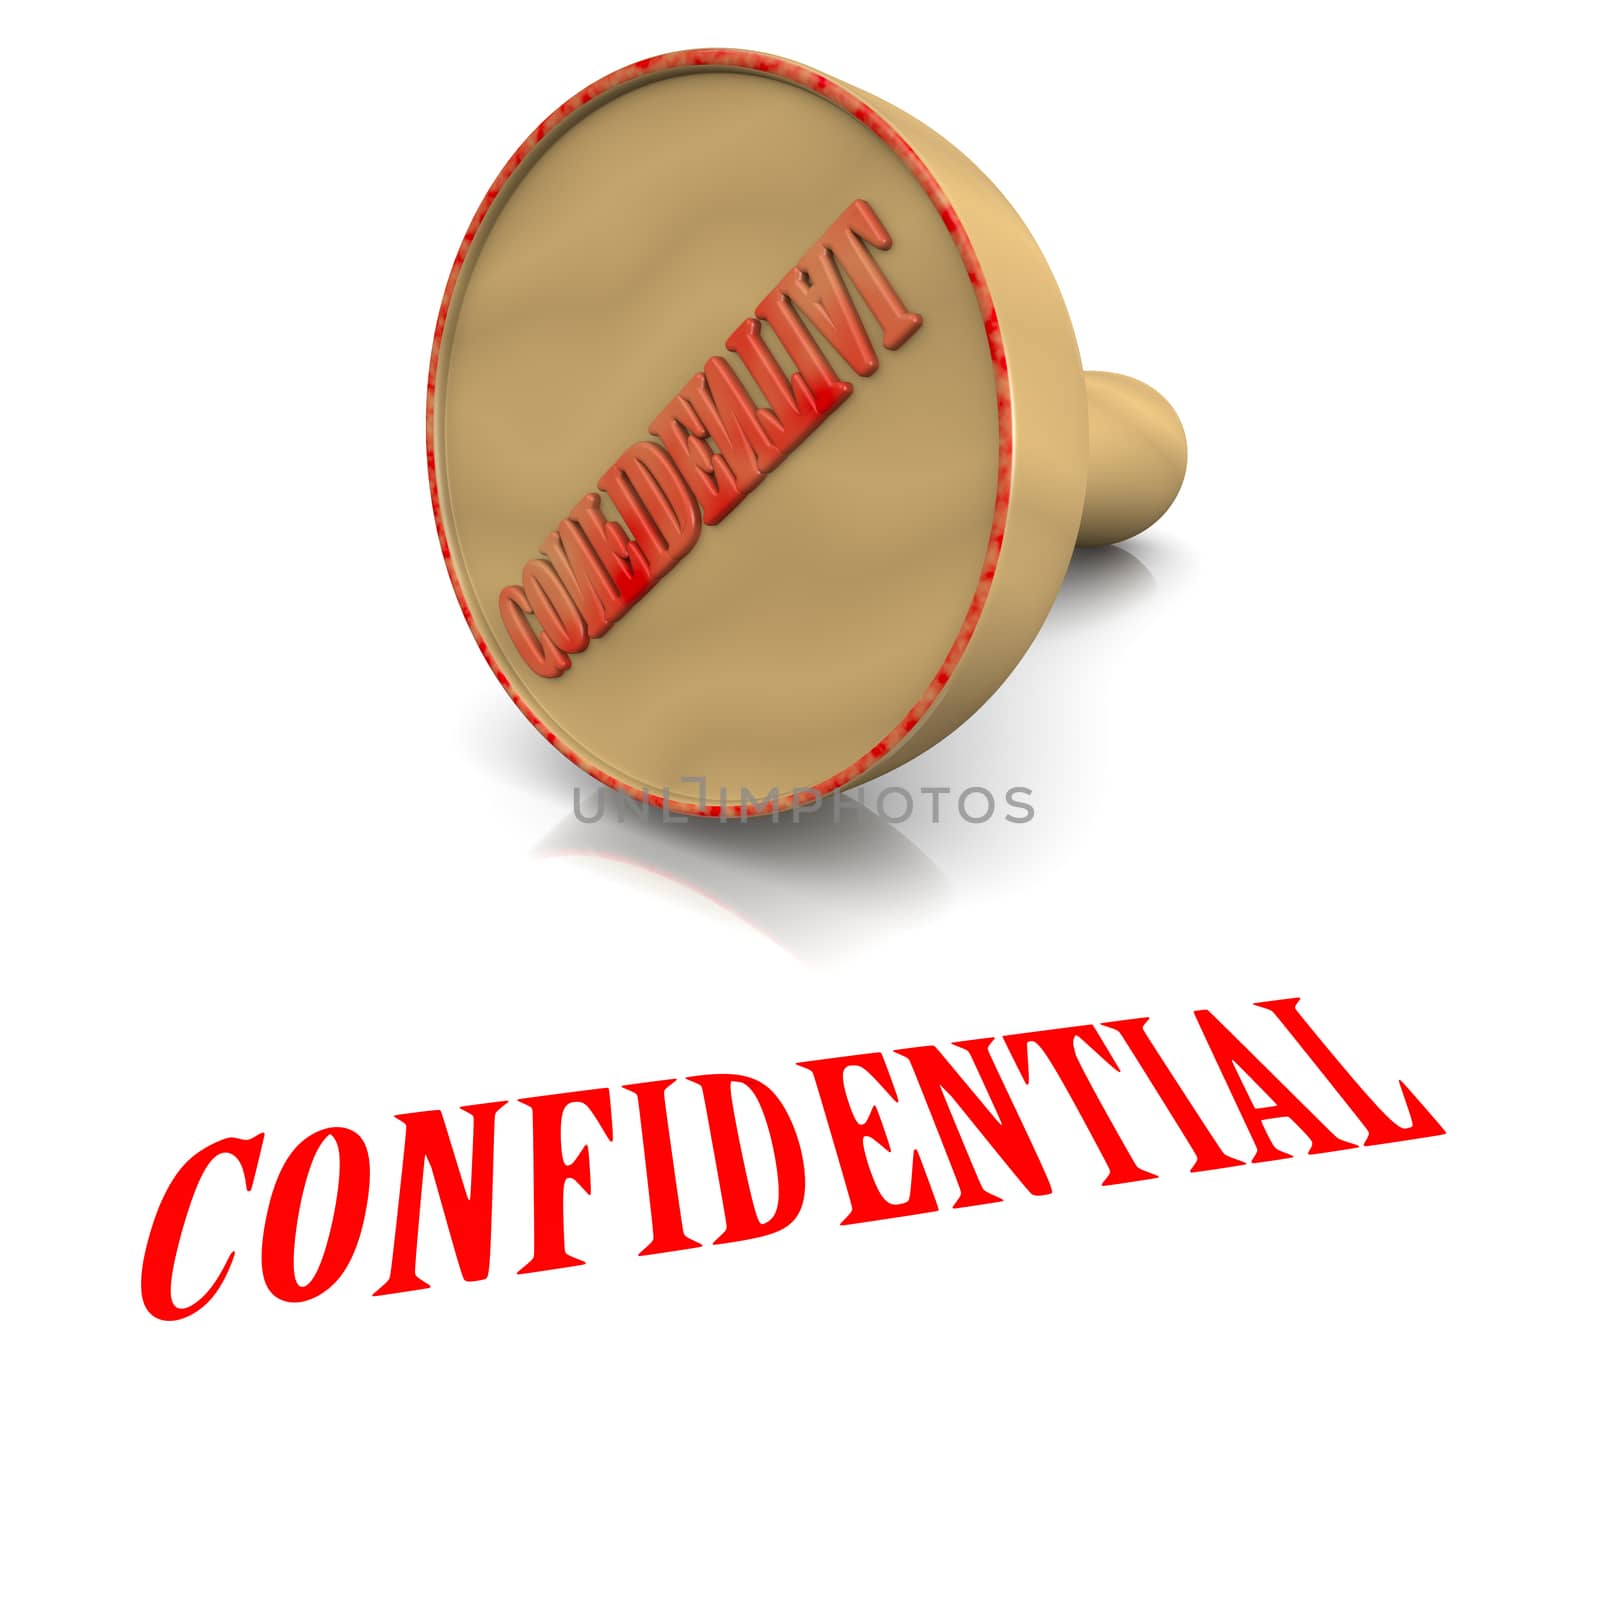 Confidential Stamp by make